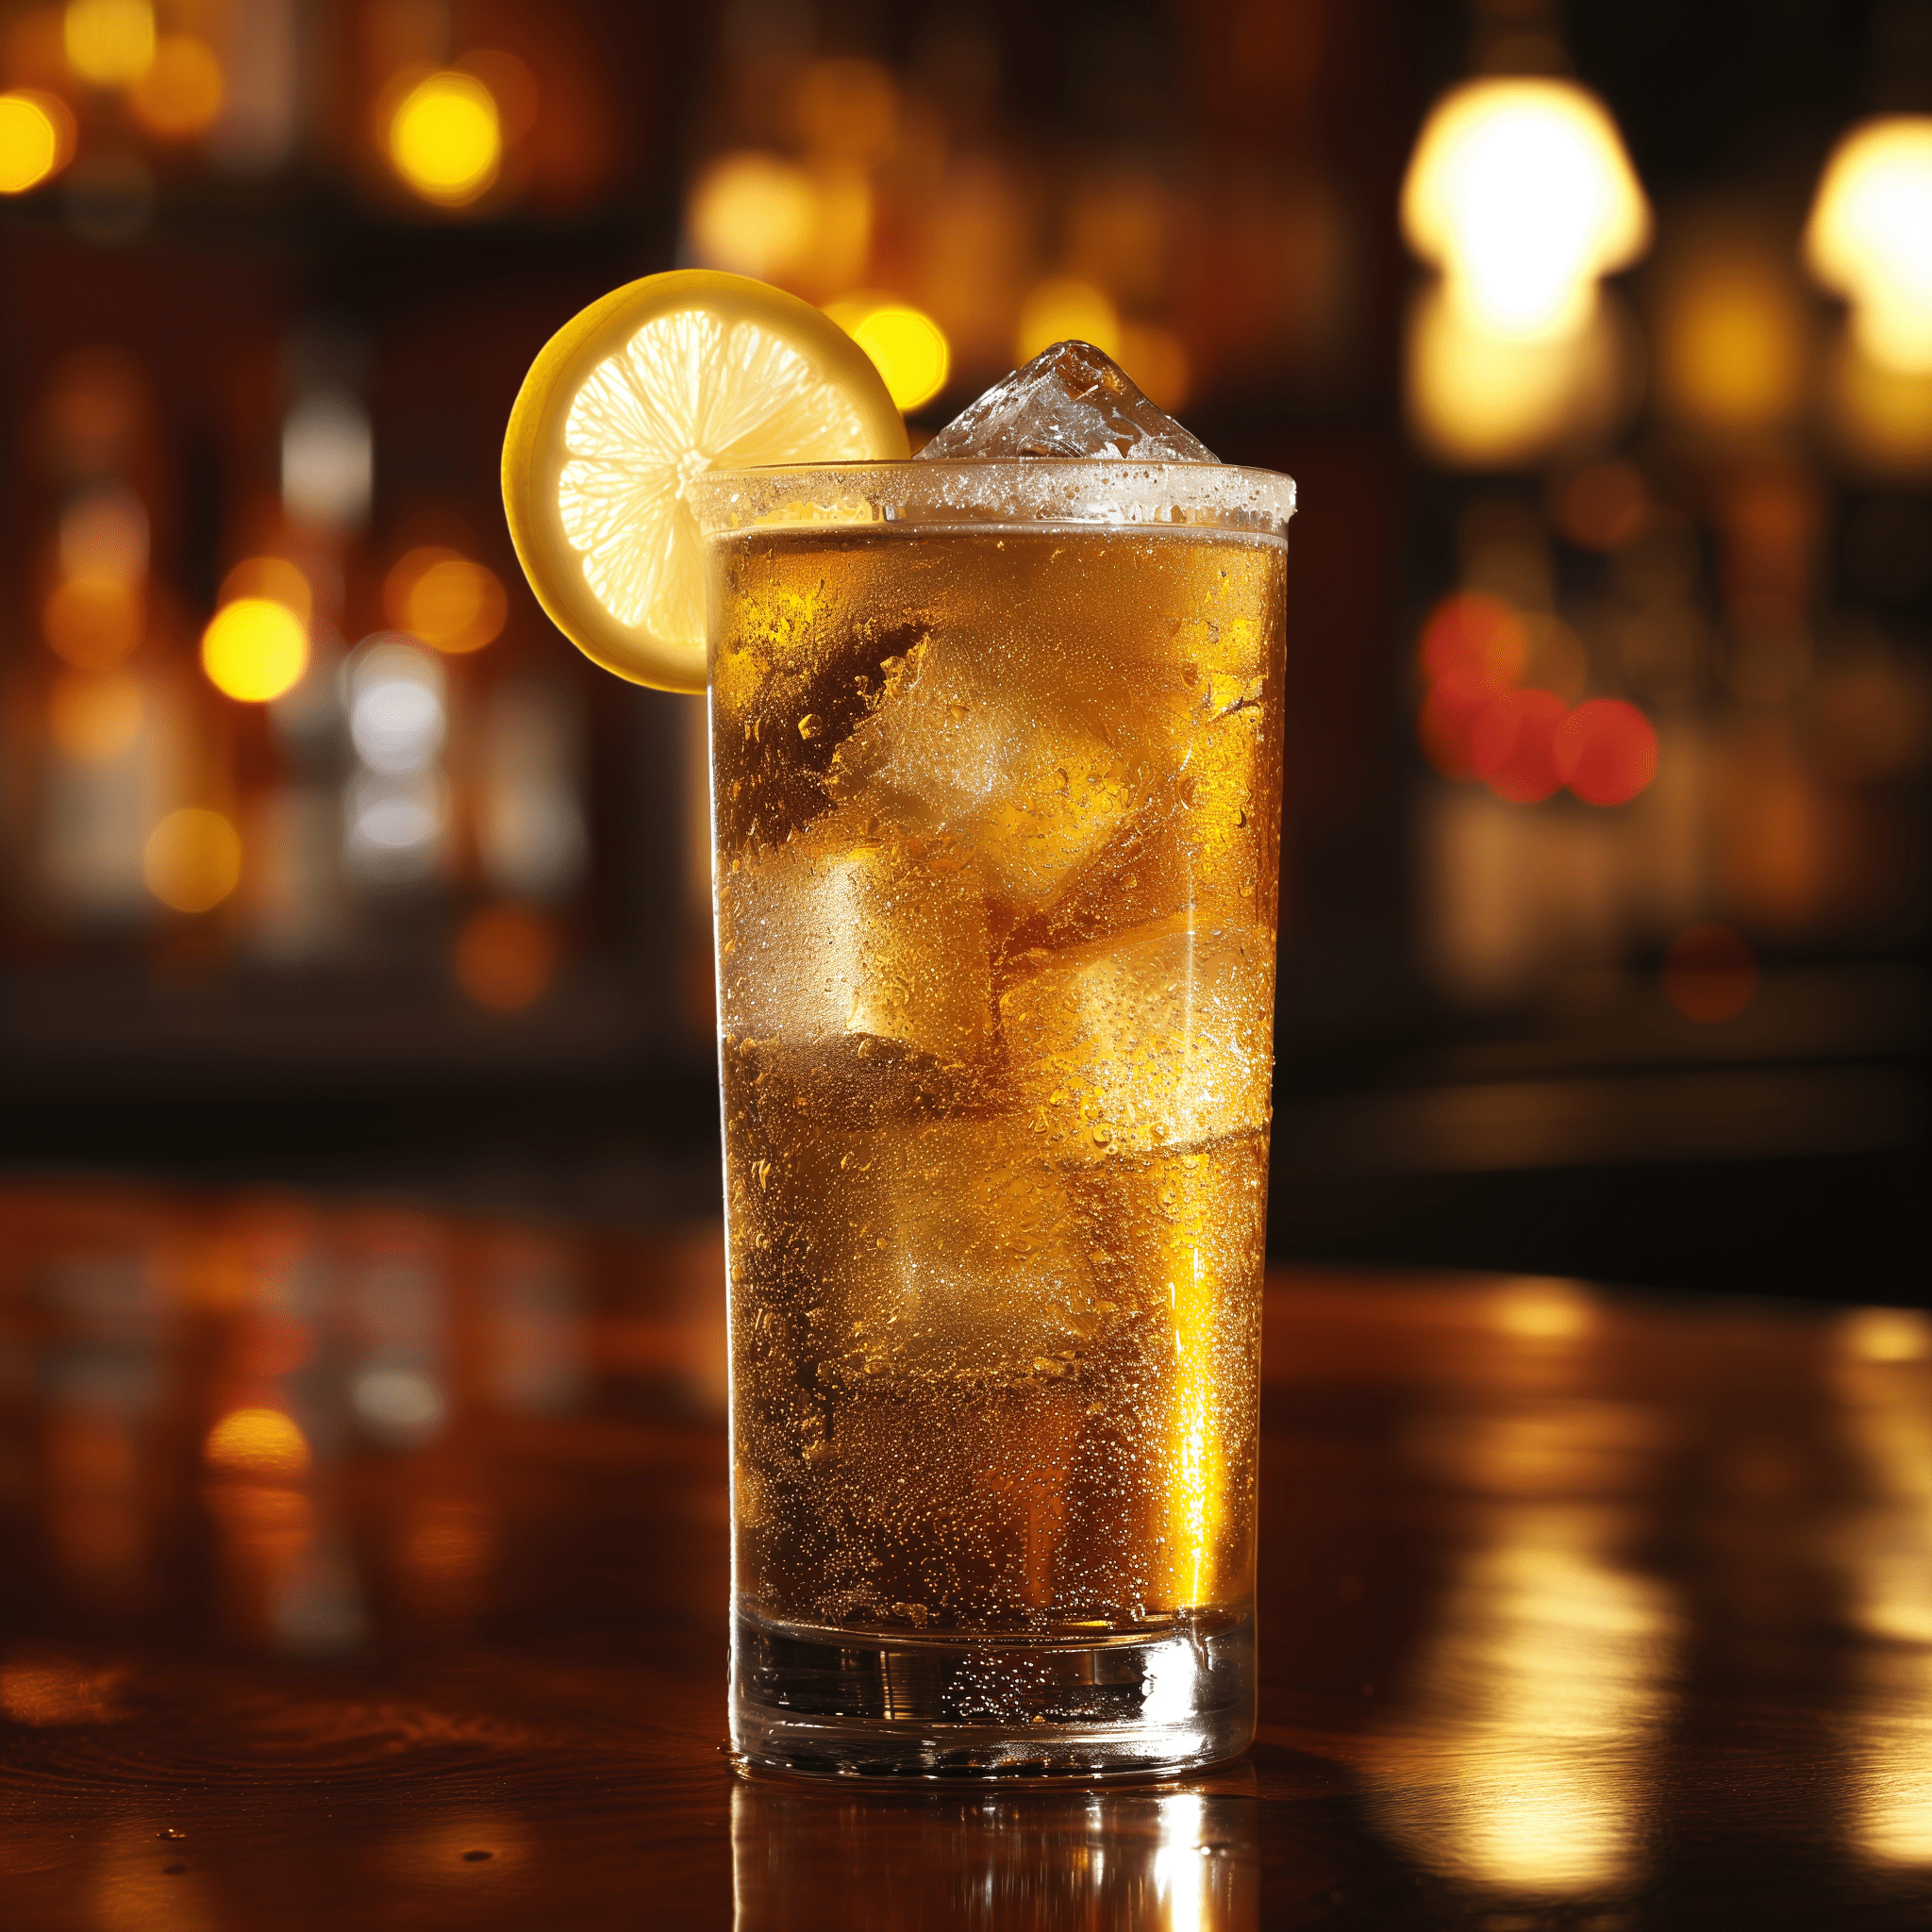 Bourbon and Seven Cocktail Recipe - The Bourbon and Seven is a harmonious blend of sweet, caramel notes from the bourbon balanced with the tart, effervescent lemon-lime soda. It's a robust drink with a refreshing edge, perfect for sipping on a warm day or as a casual evening refreshment.